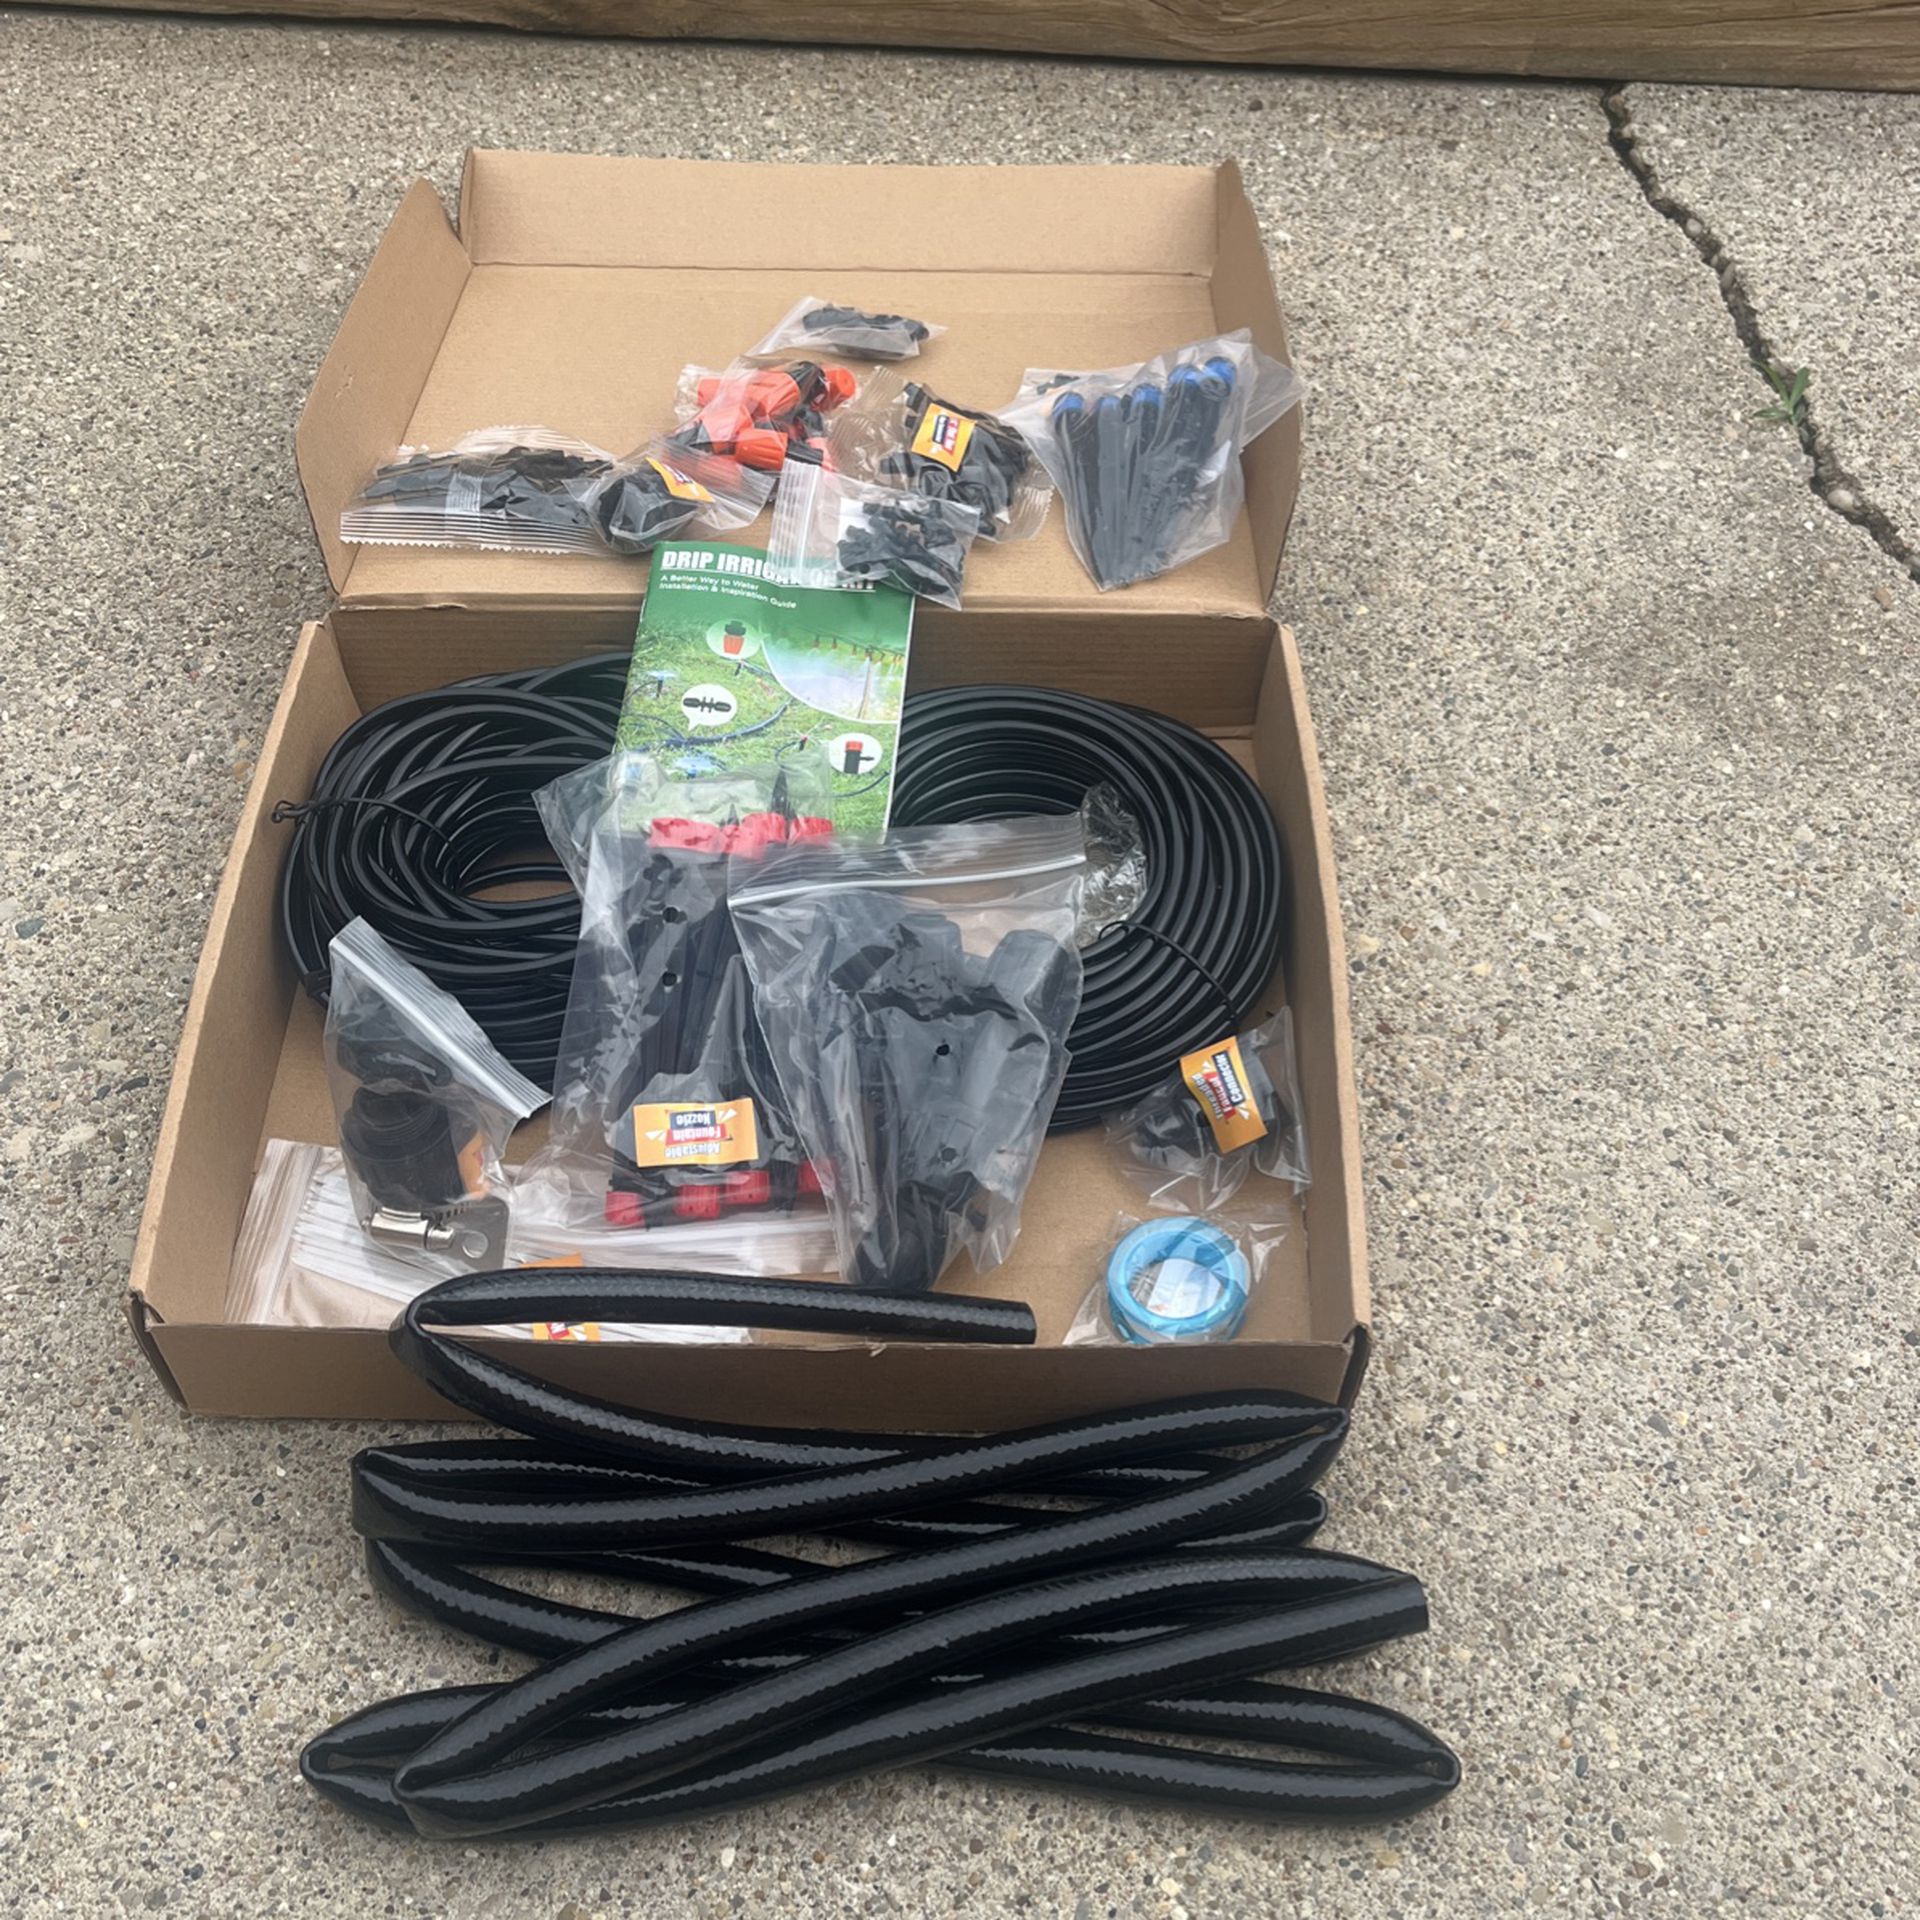 New Drip Irrigation Kit For garden, Greenhouse, Pots, Plants, Patio, Trees. 